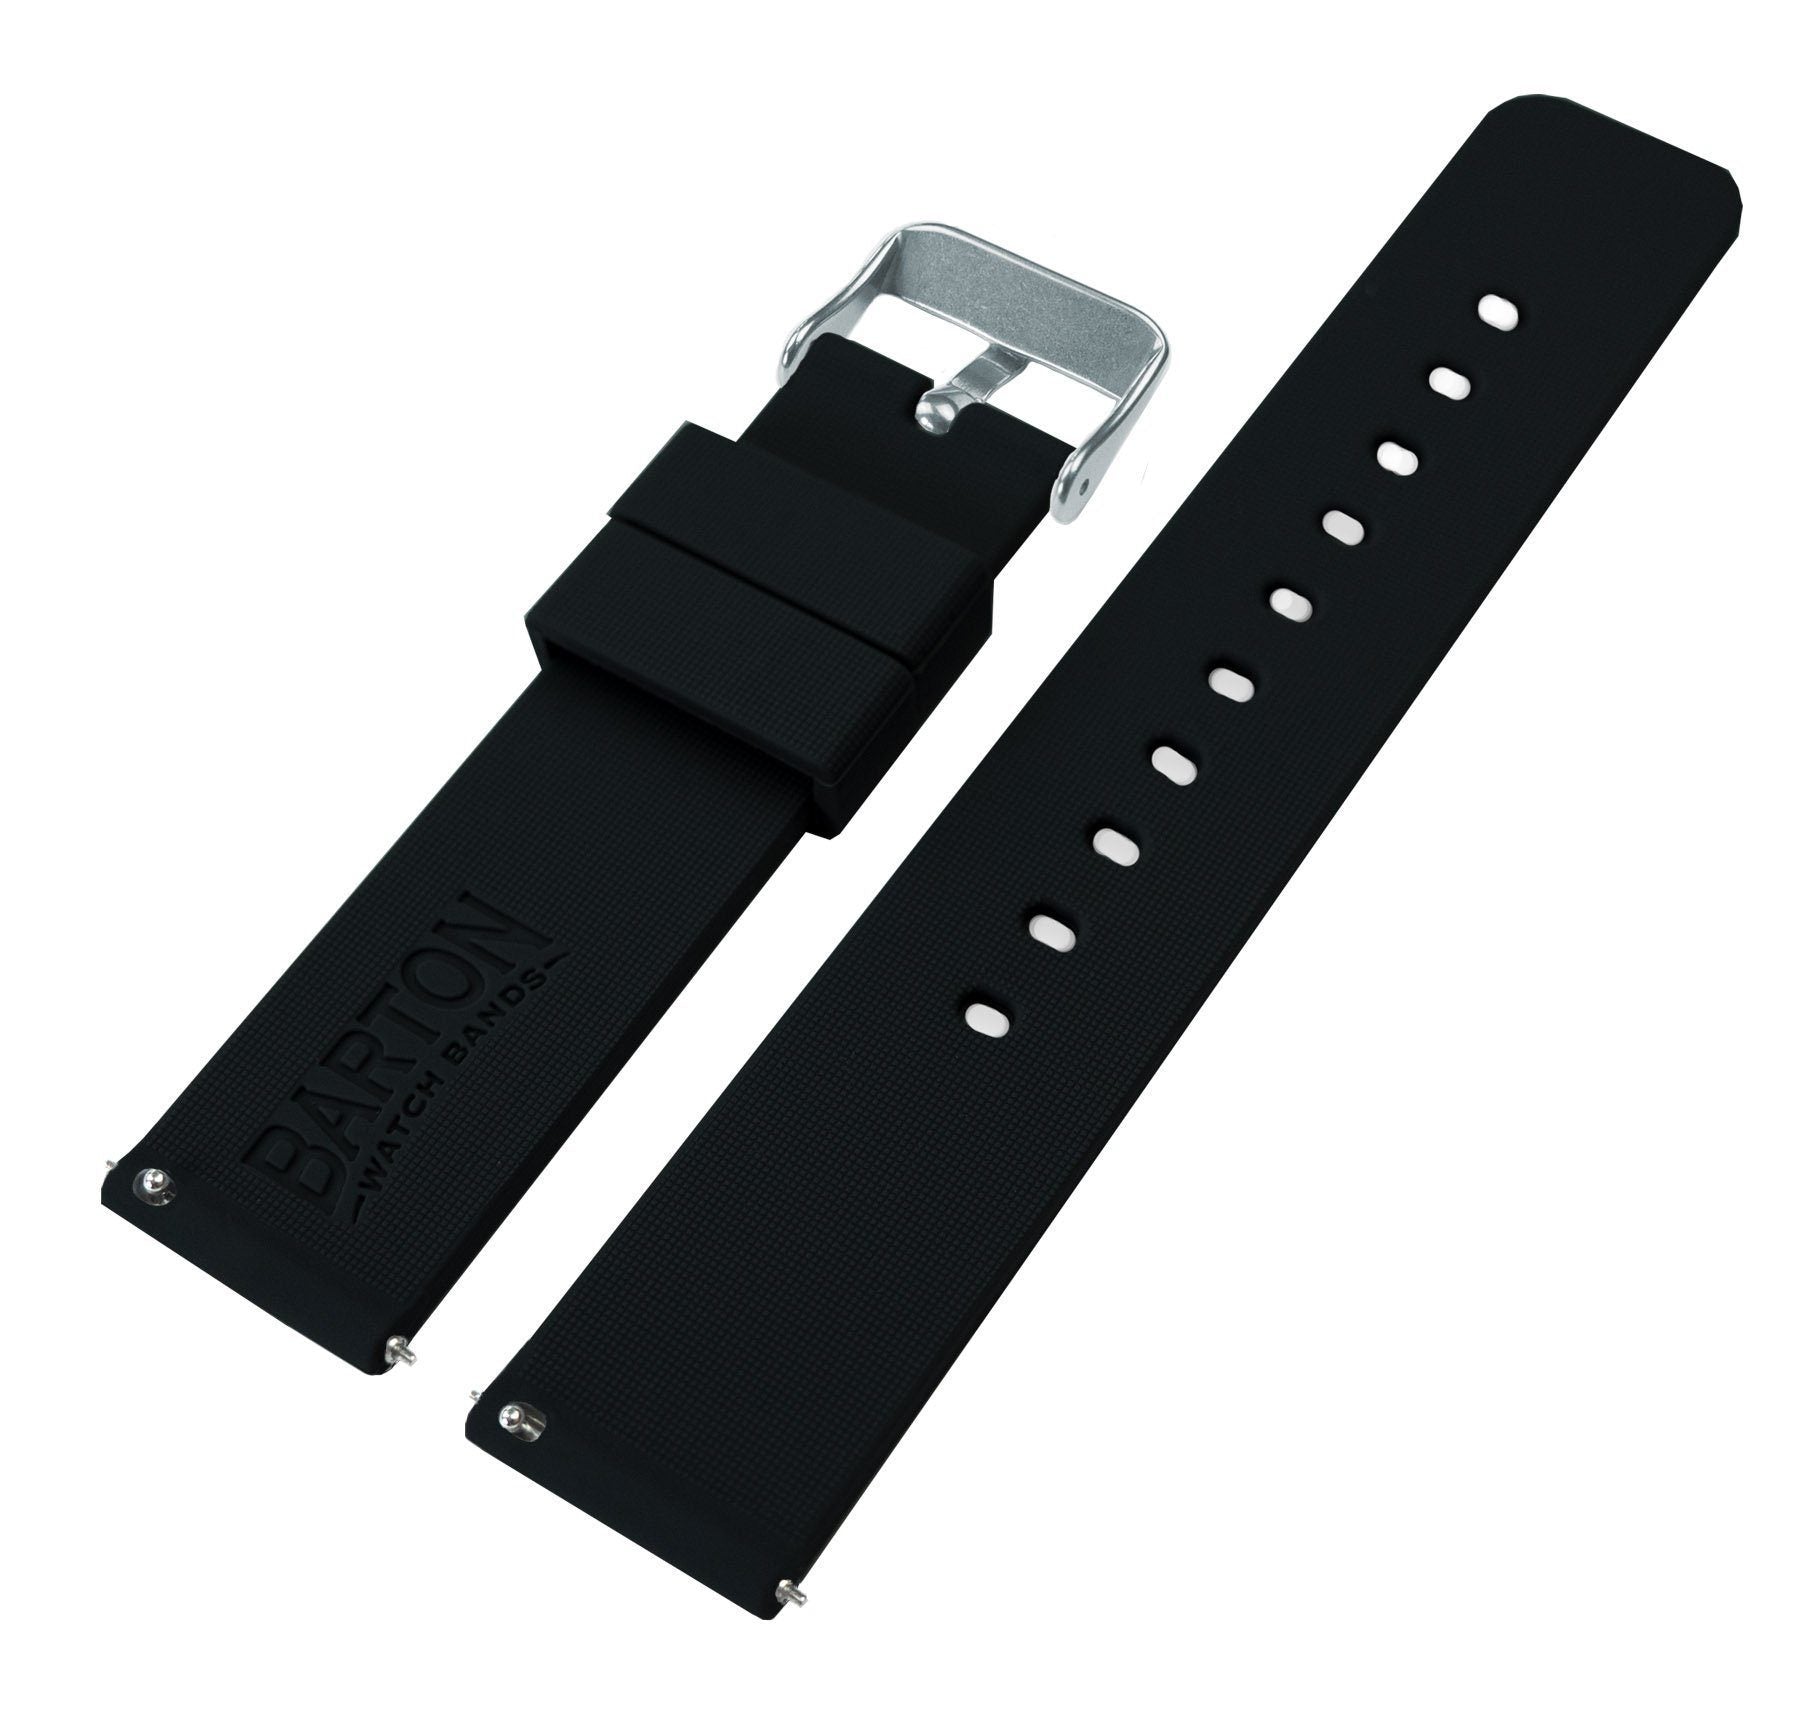 Withings / Nokia Activité and Steel HR | Silicone | Black - Barton Watch Bands